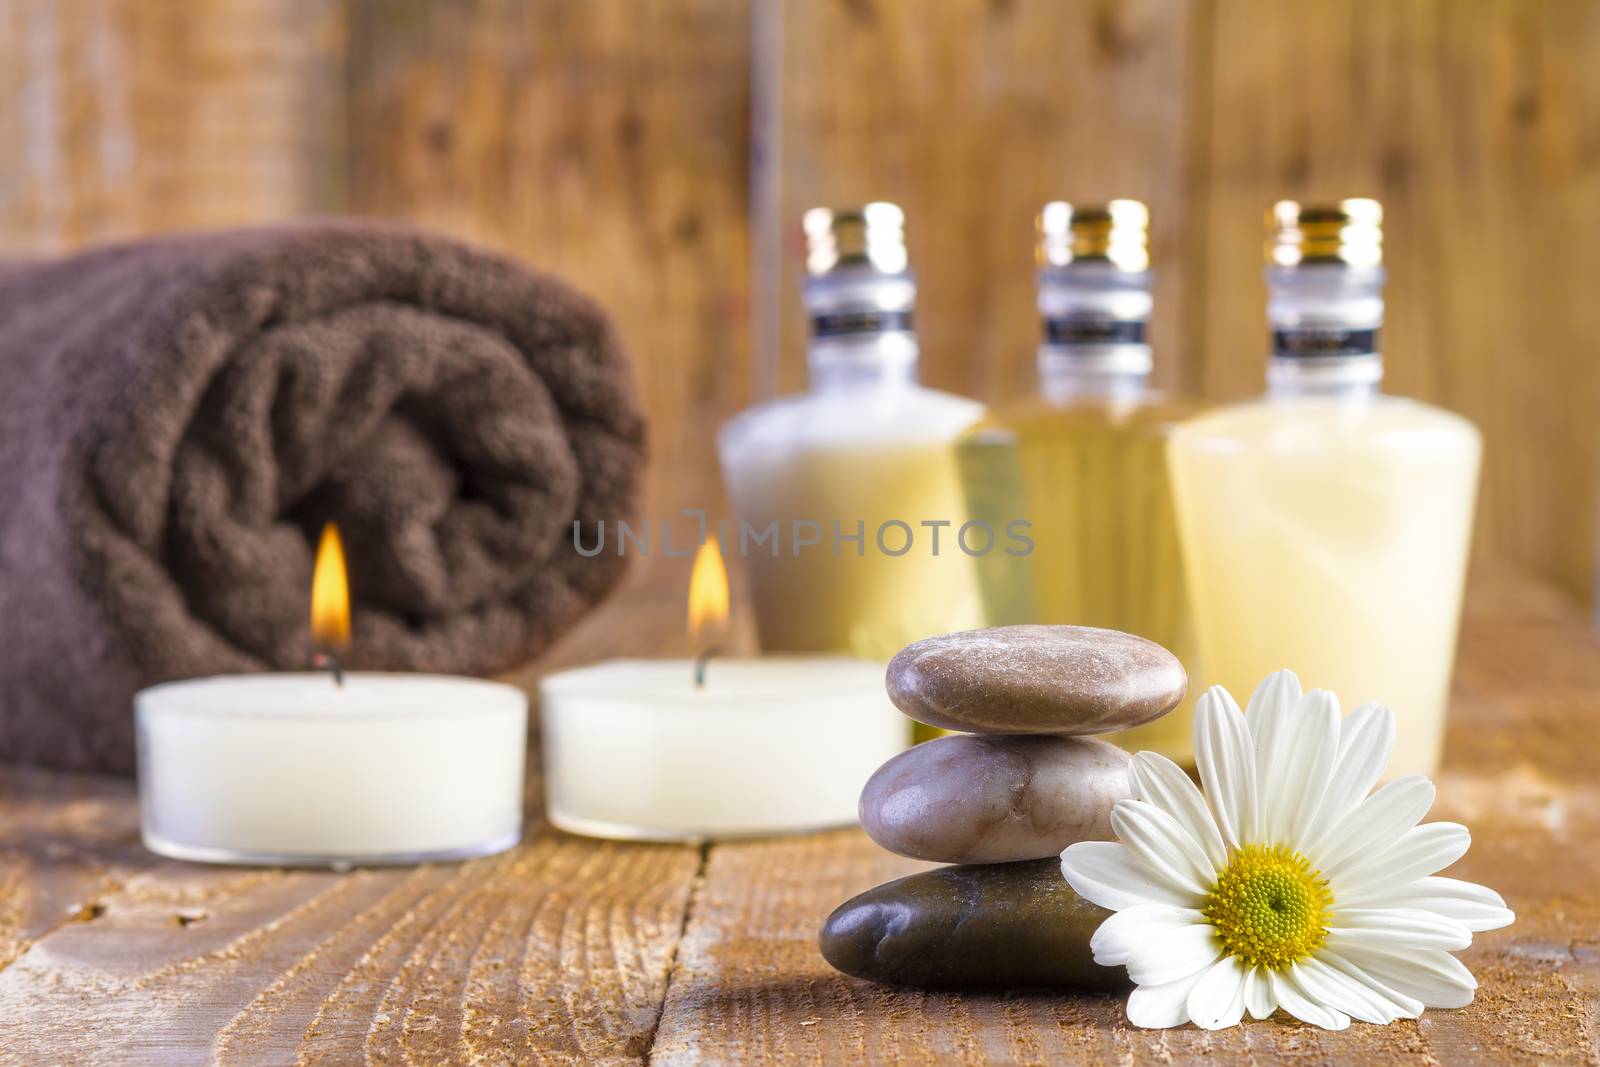 zen basalt stones and spa oil with candles on the wood